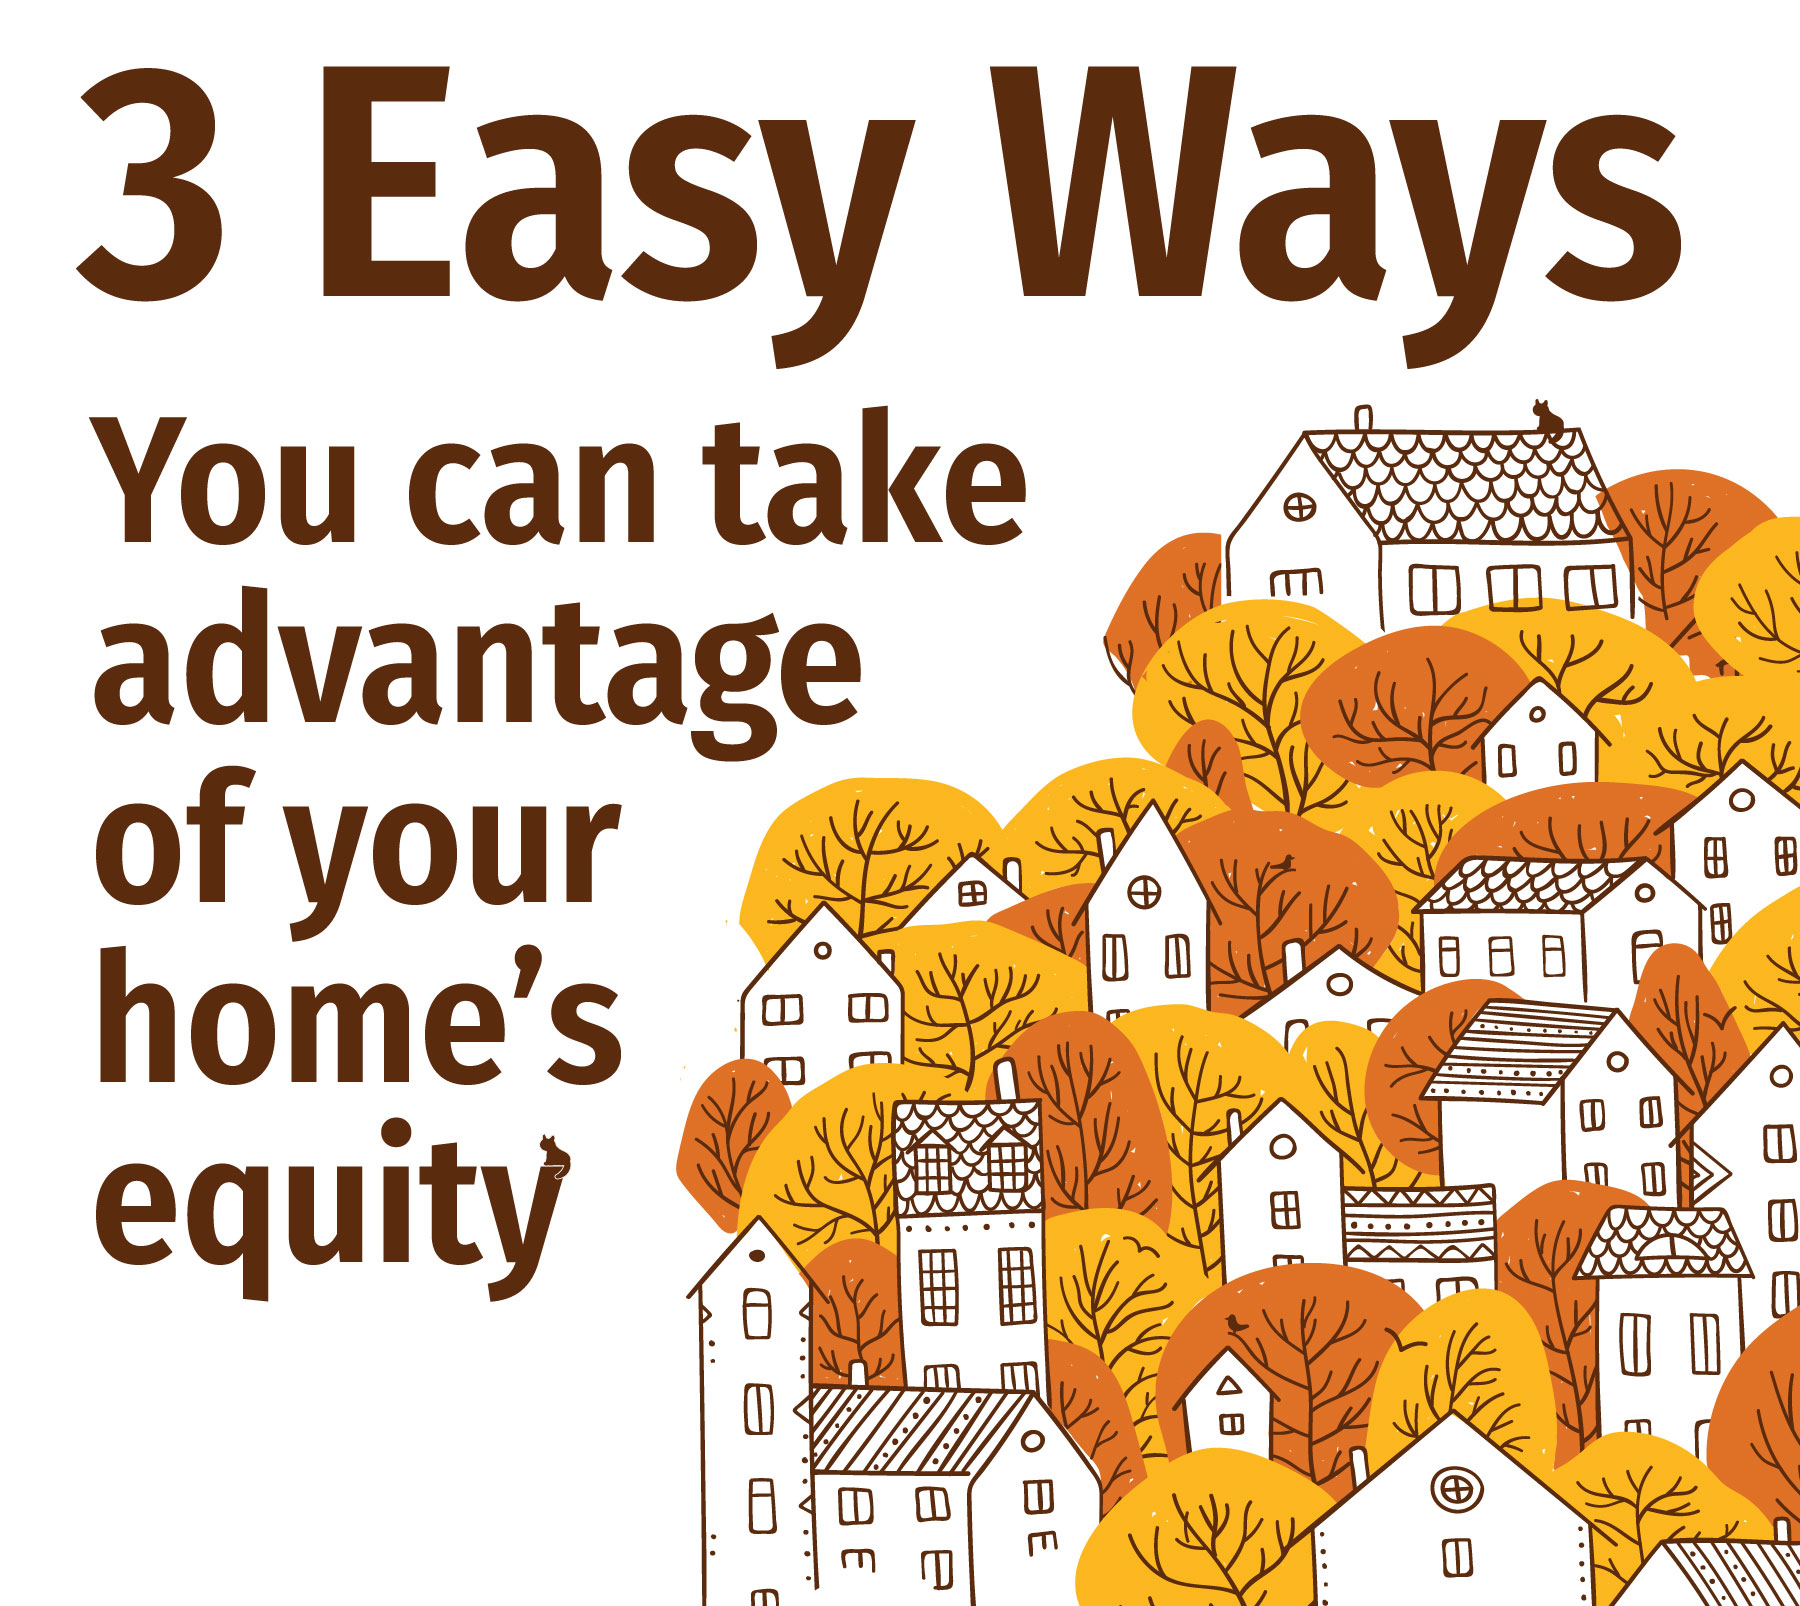 3 Easy Ways To Use Your Home’s Equity